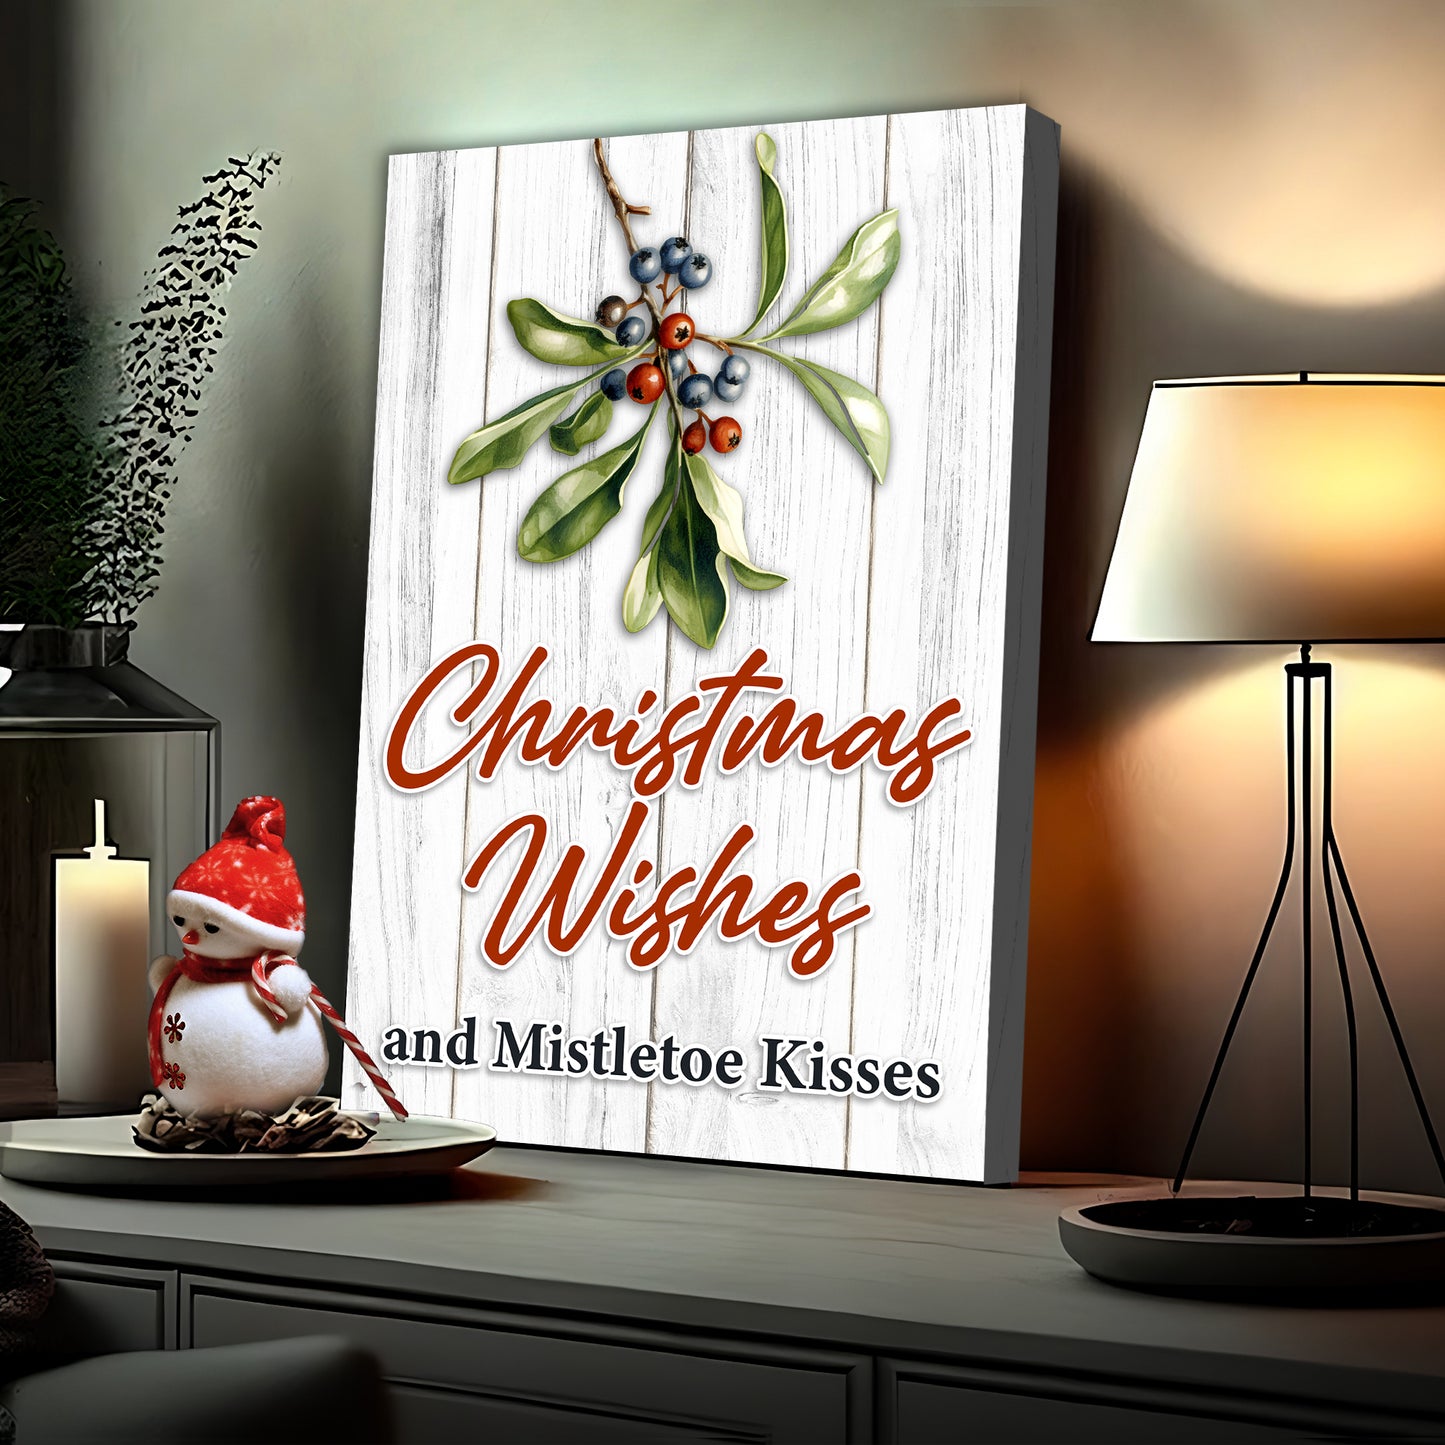 Christmas Wishes And Kisses Mistletoe Sign  - Image by Tailored Canvases